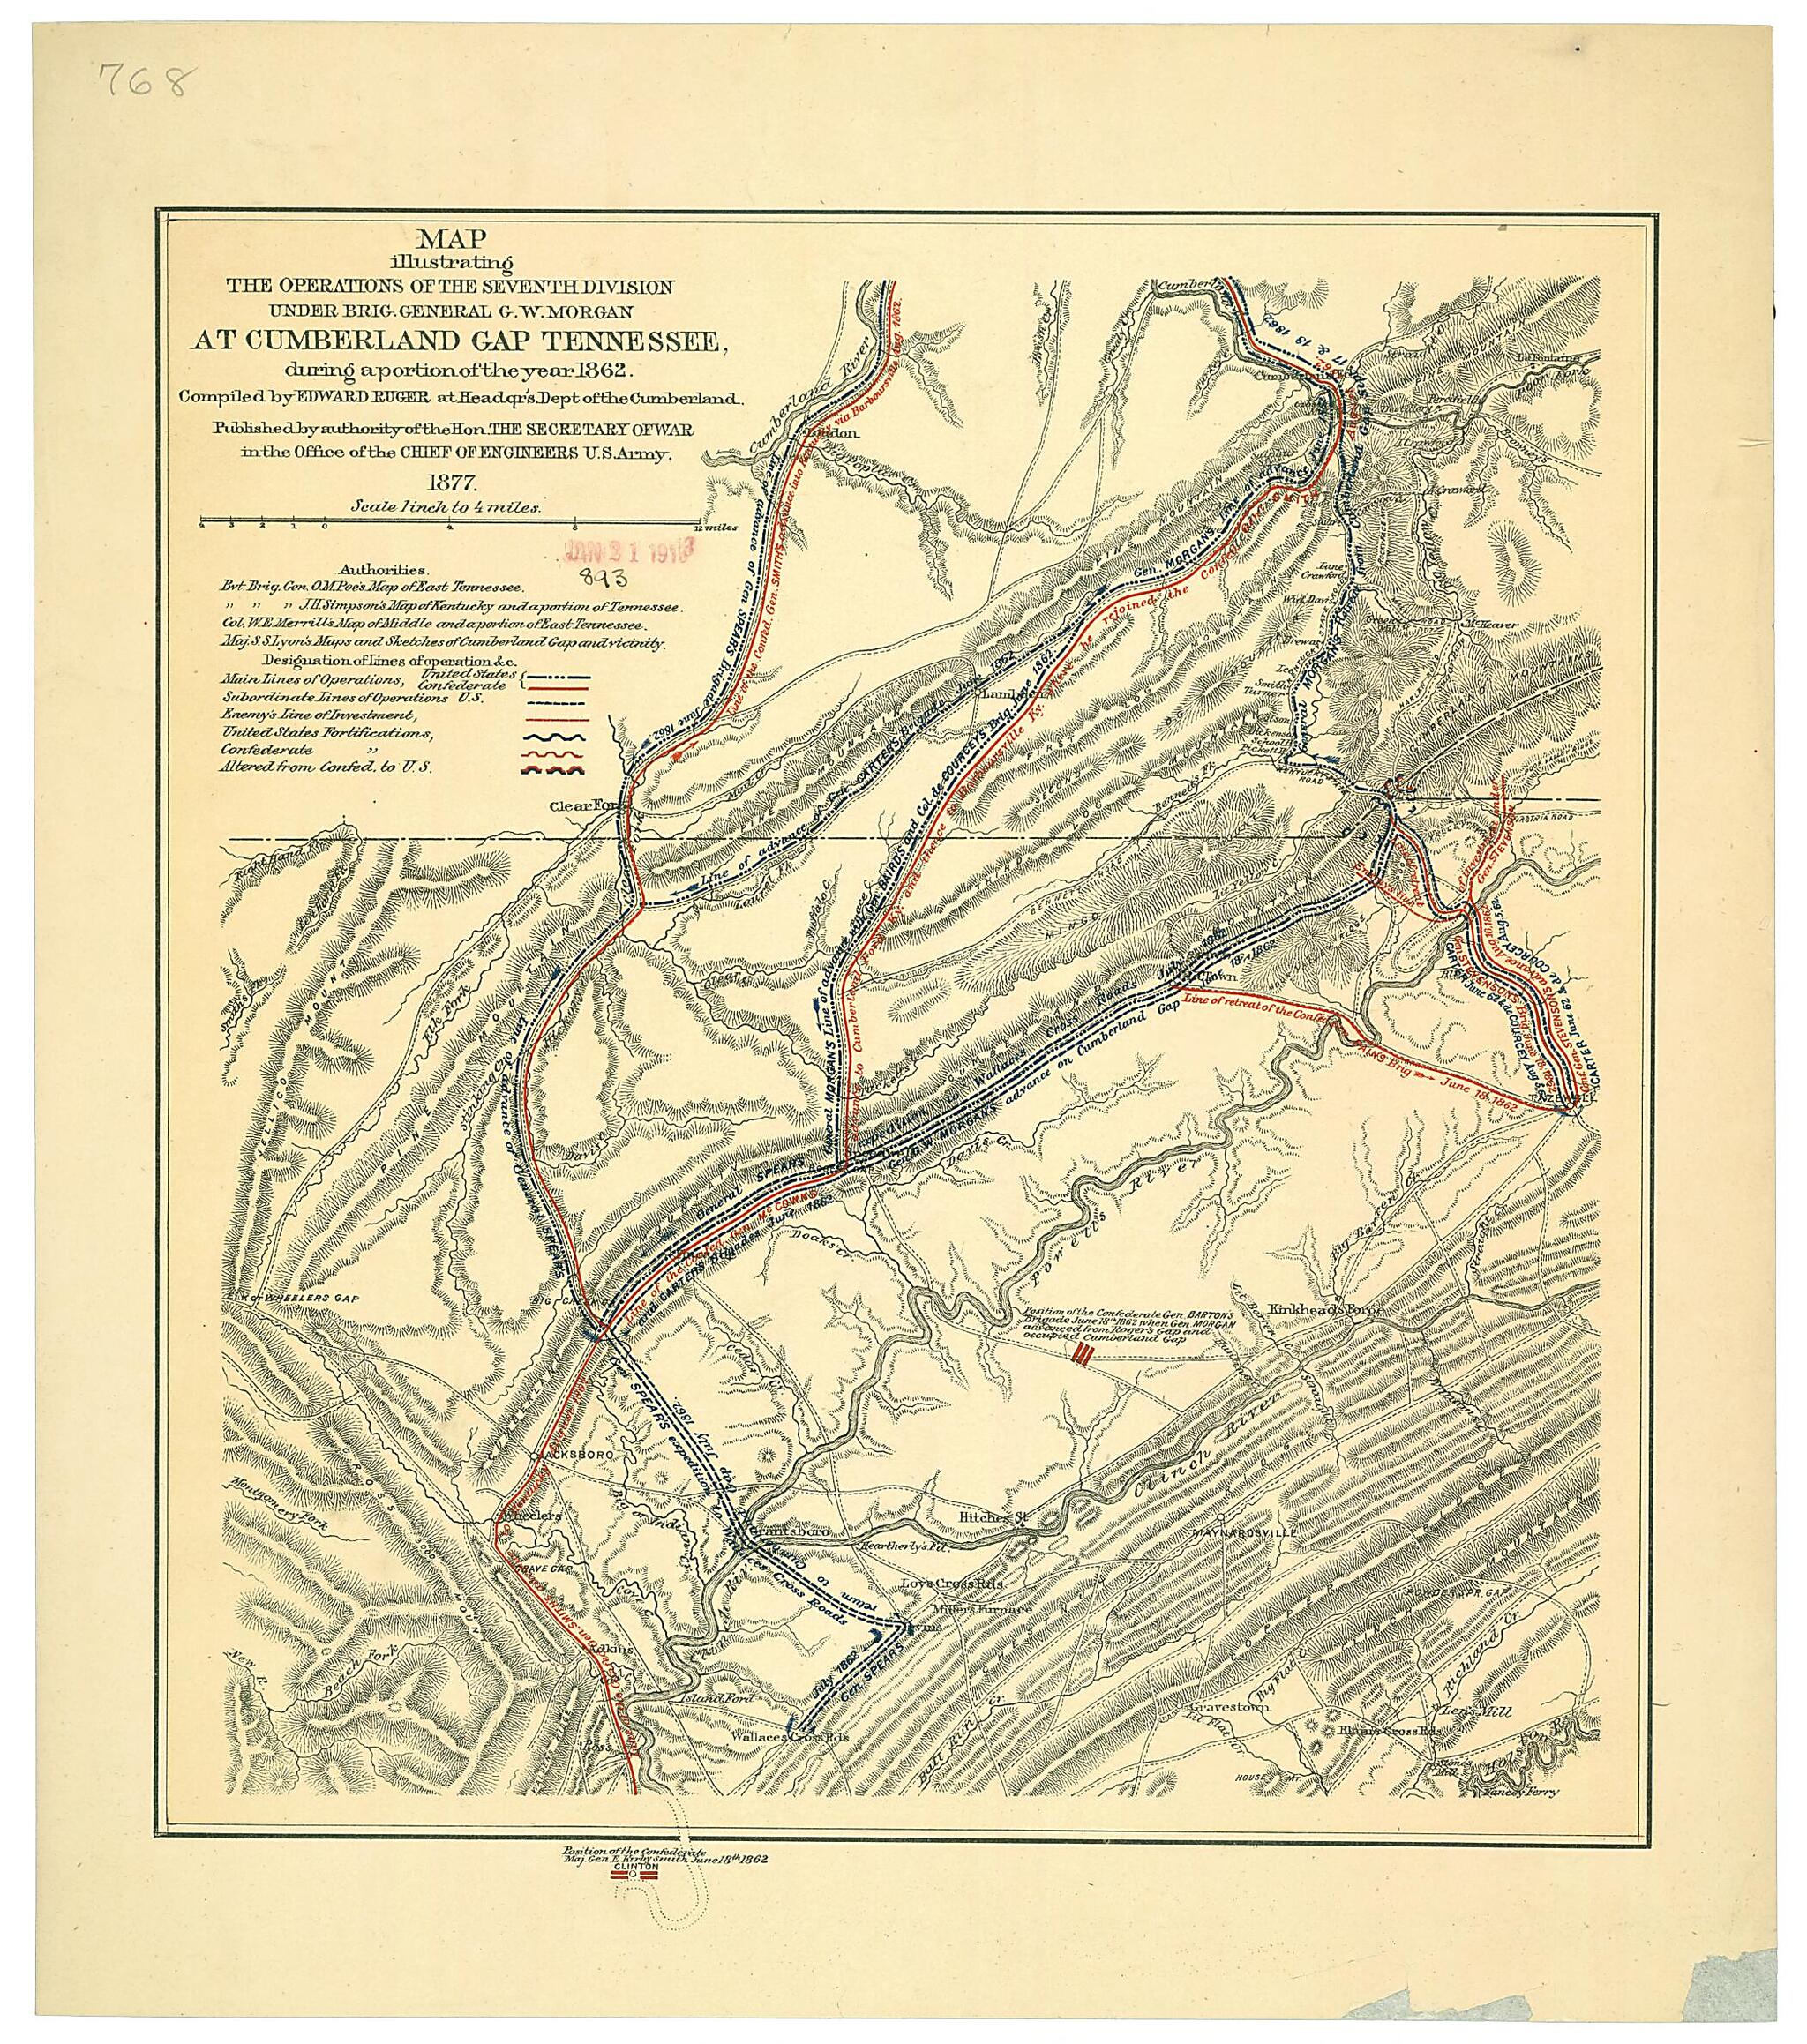 This old map of Map Illustrating the Operations of the Seventh Division Under Brig. General G.W. Morgan at Cumberland Gap, Tennessee During a Portion of the Year from 1862 was created by Edward Ruger,  United States. Army. Corps of Engineers in 1862